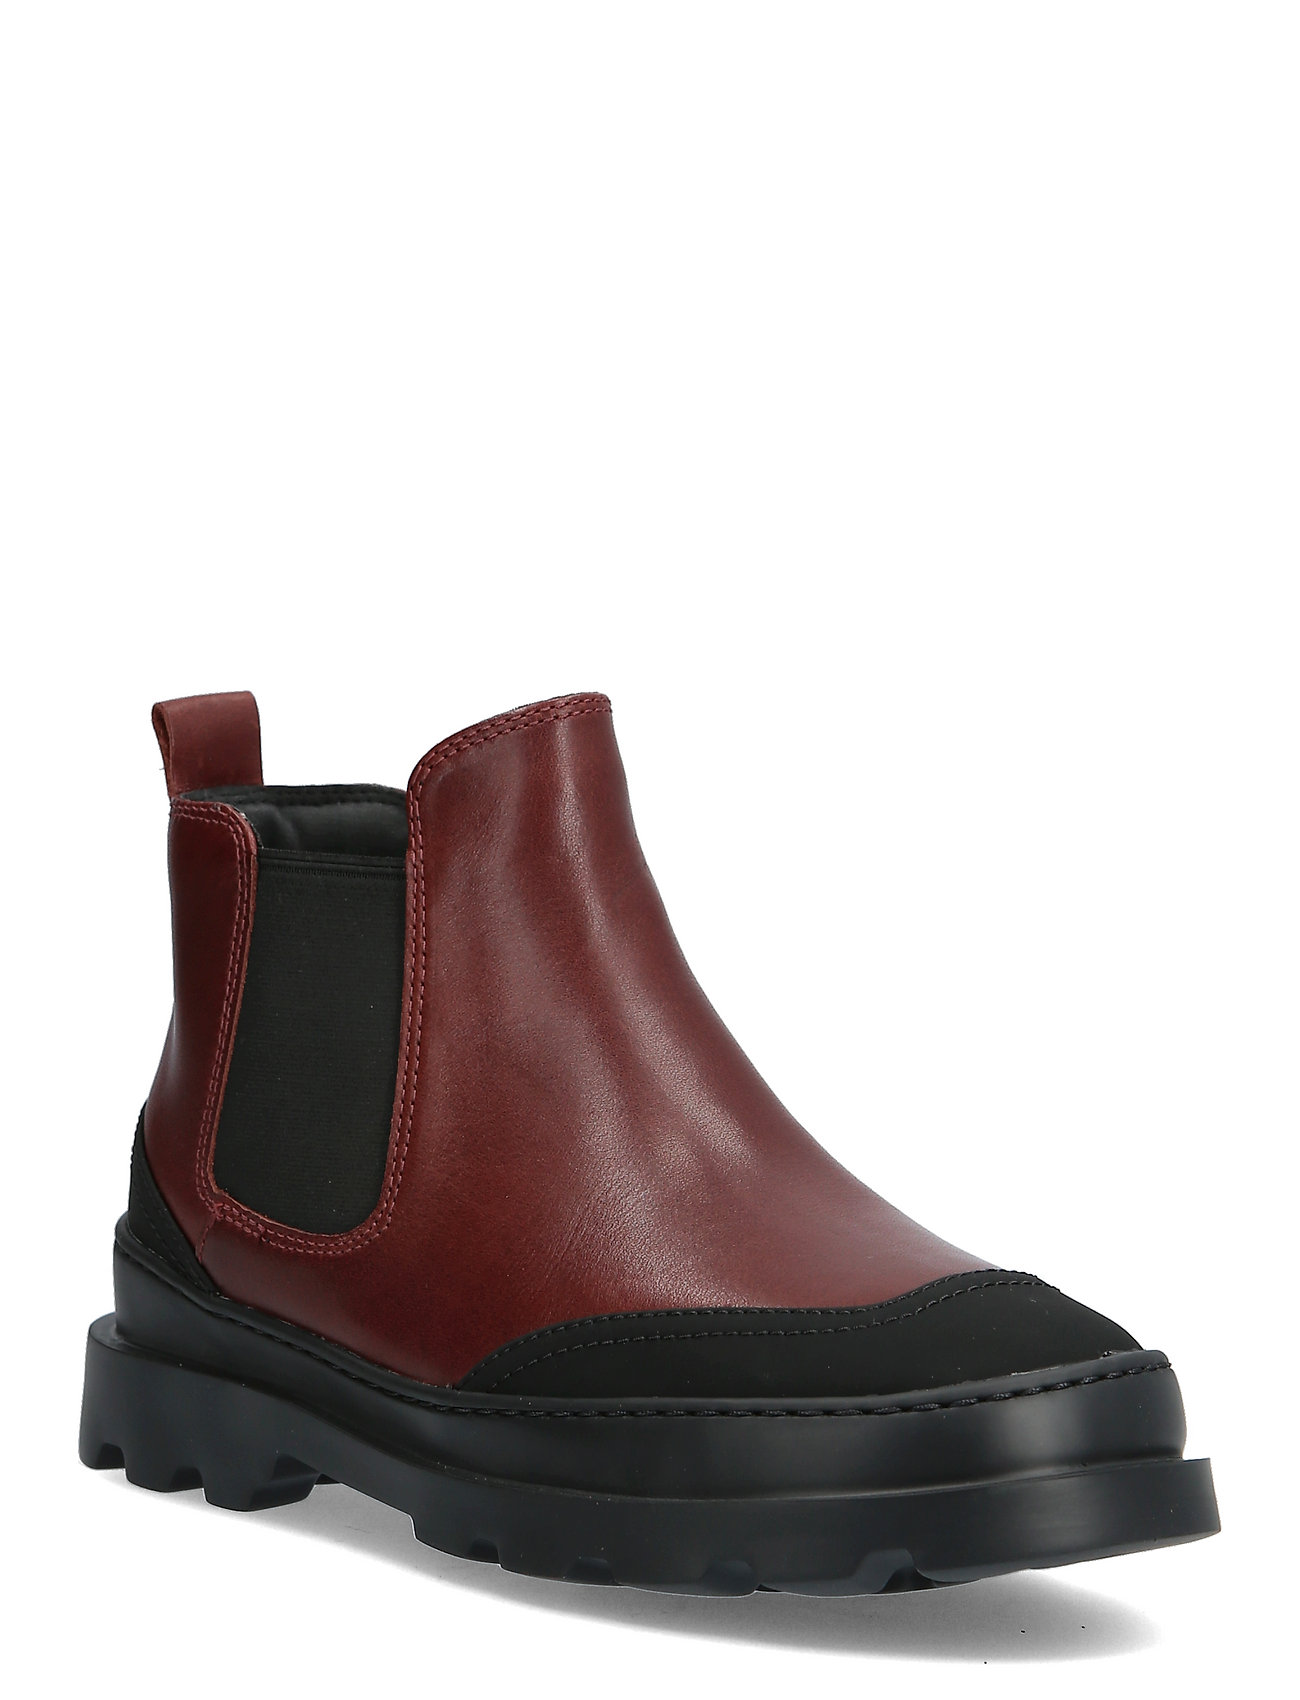 Brutus Shoes Chelsea Boots Ruskea Camper